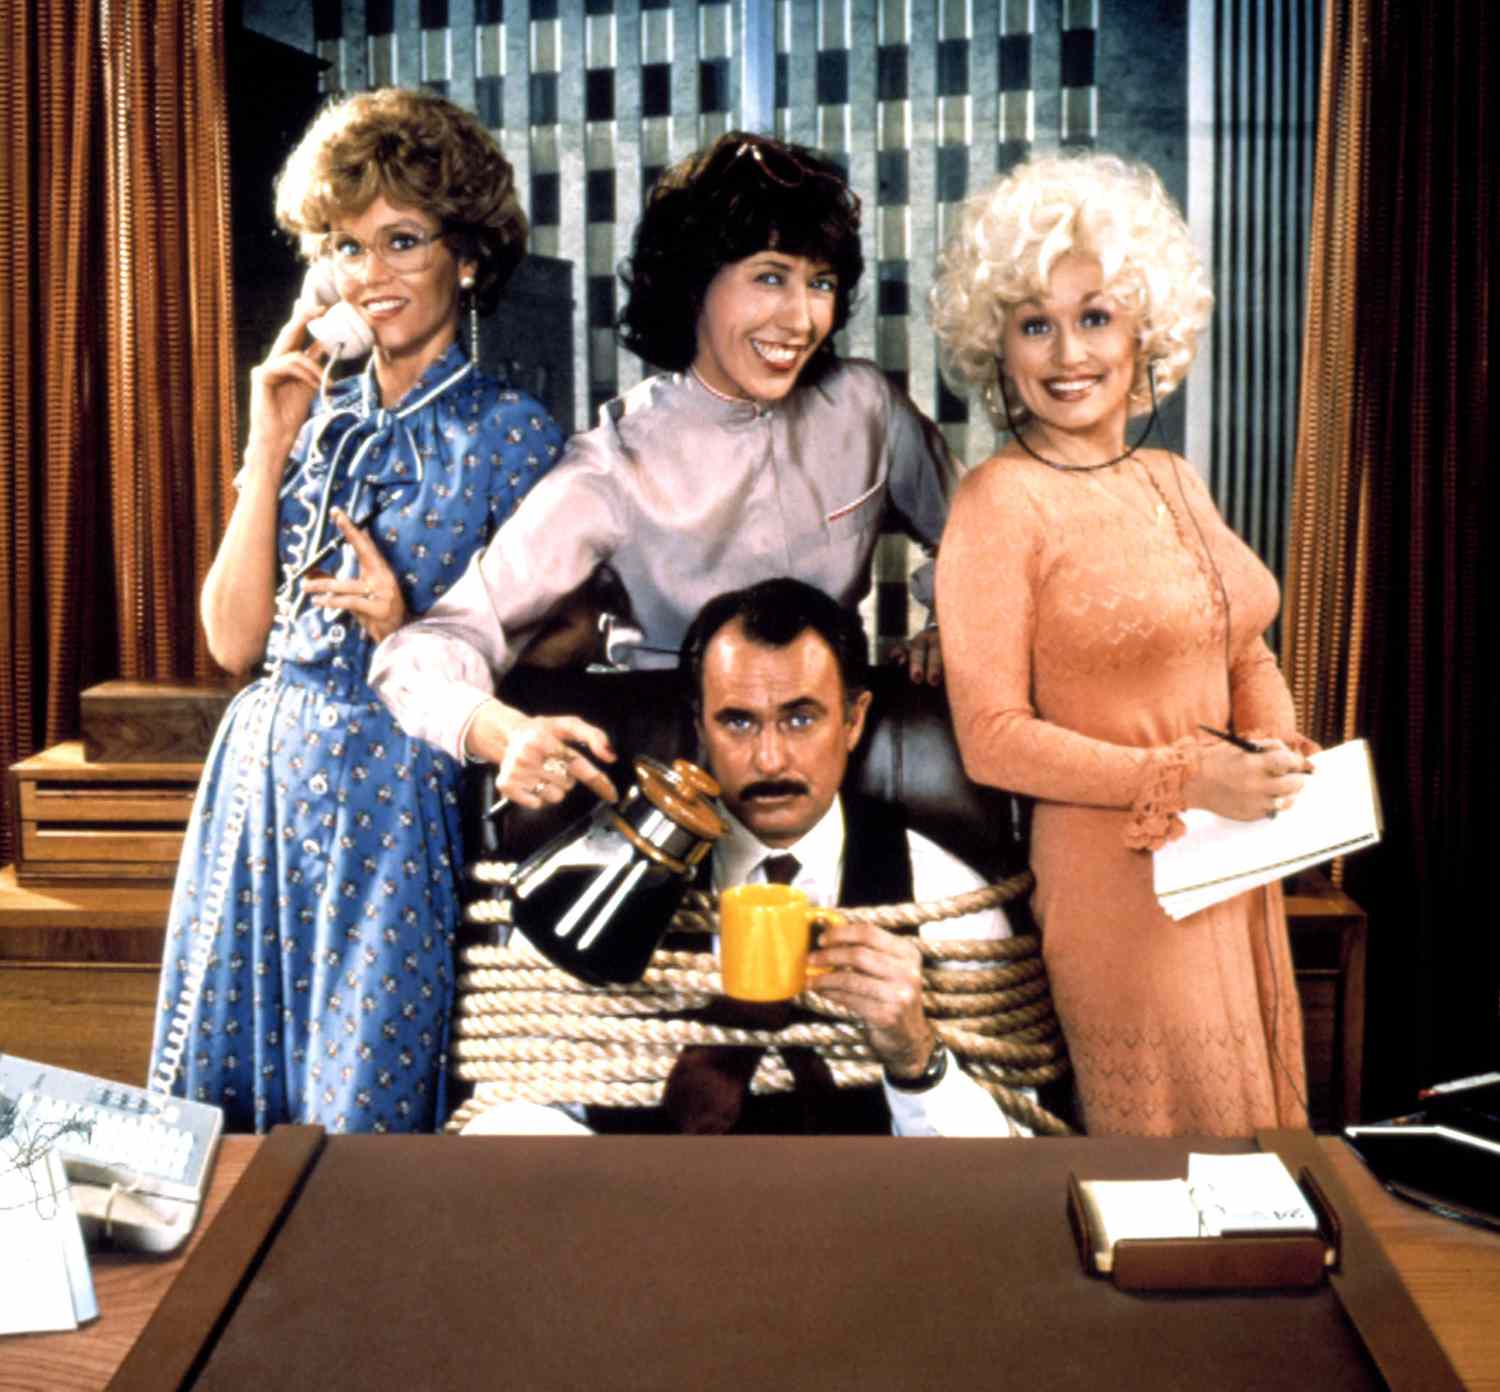 Dolly Parton Pays Tribute To ‘9 to 5’ Co-Star Dabney Coleman